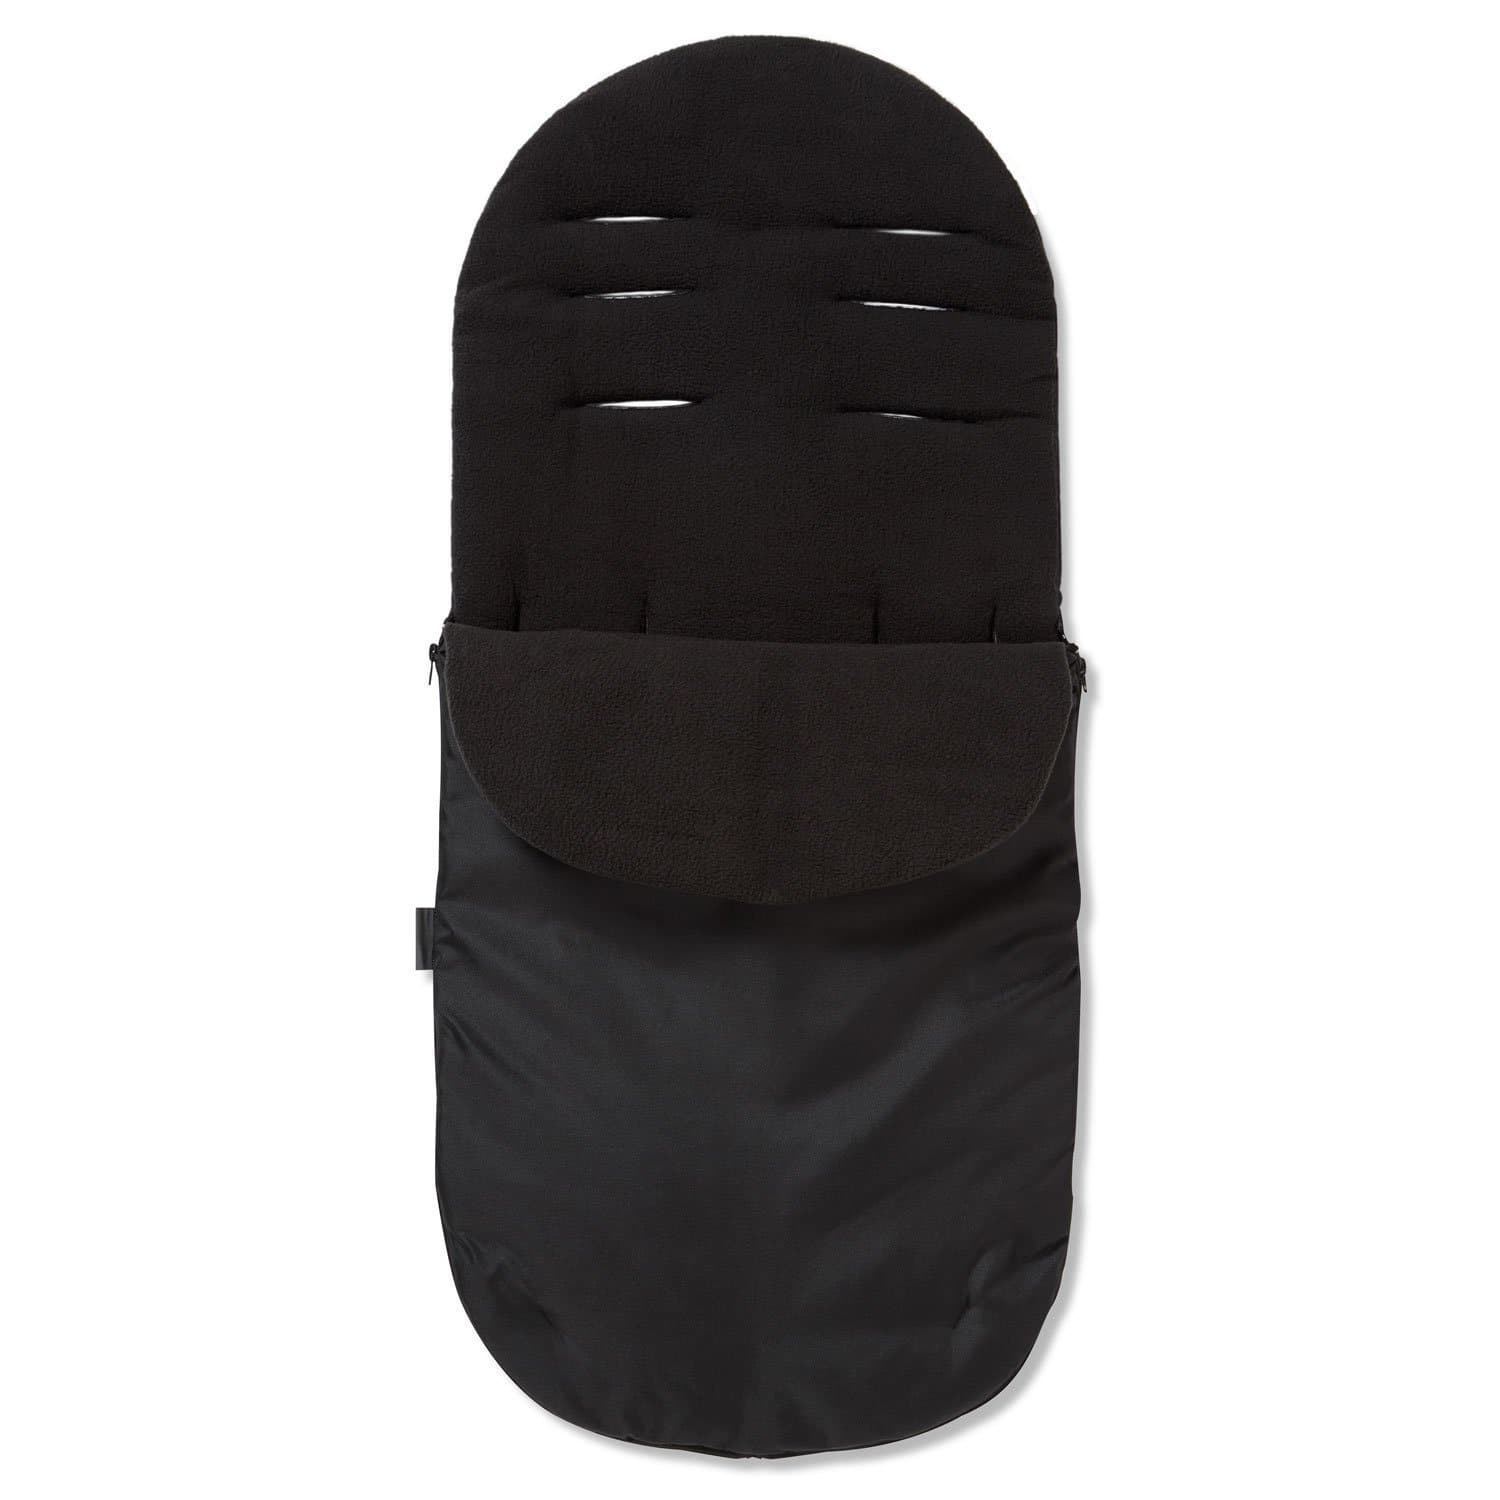 Footmuff / Cosy Toes Compatible with Red Castle - Black / Fits All Models | For Your Little One